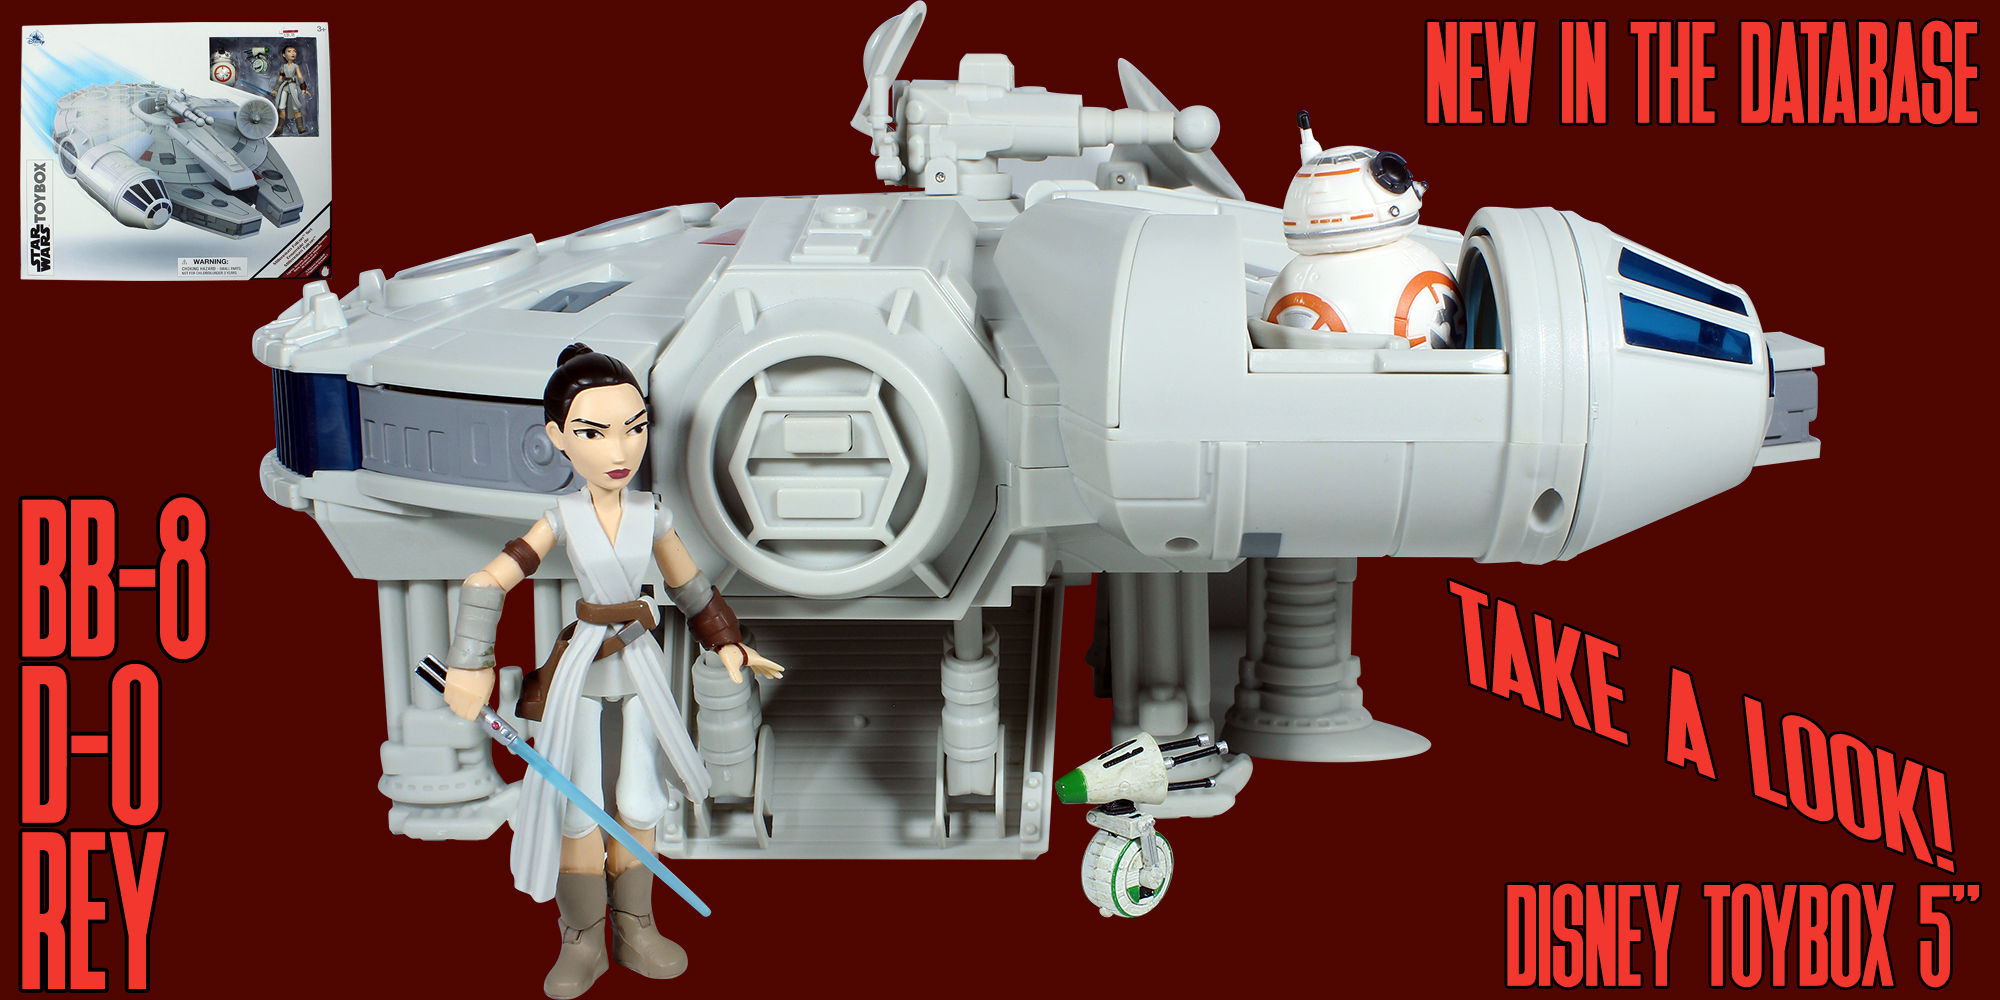 Disney 5" ToyBox Rey, D-0 and BB-8 Added